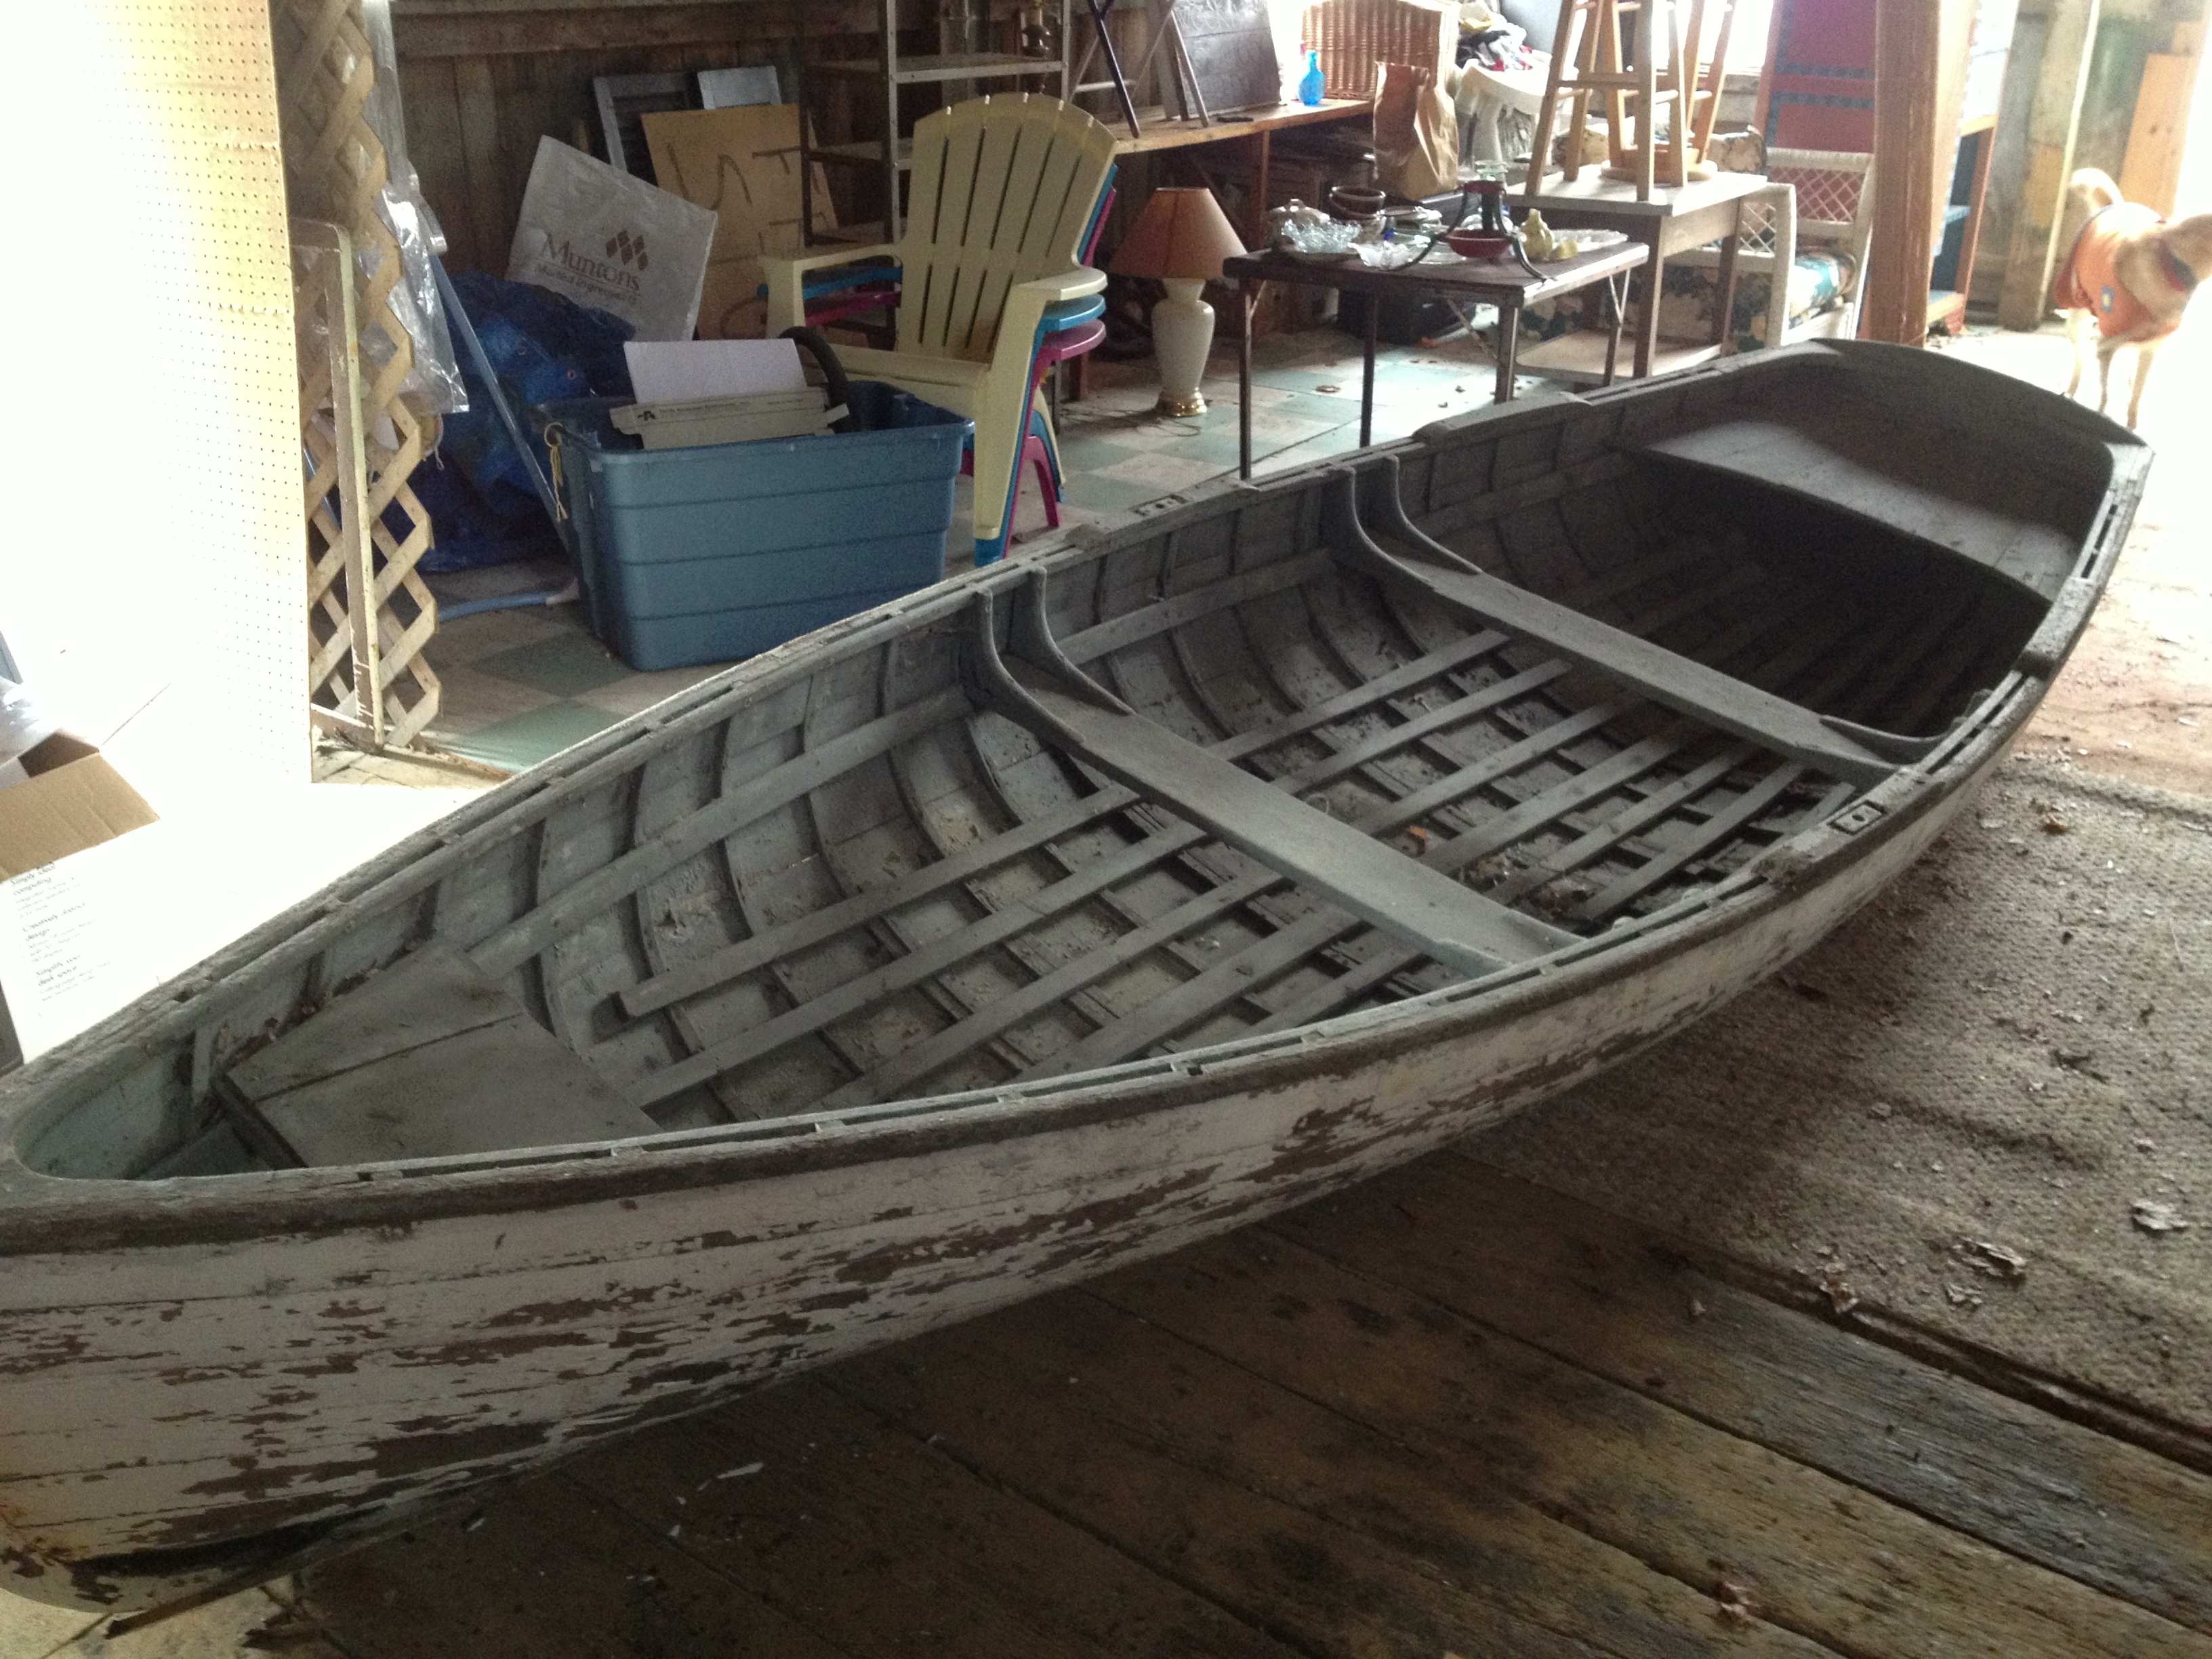 Wooden Row Boats for Sale